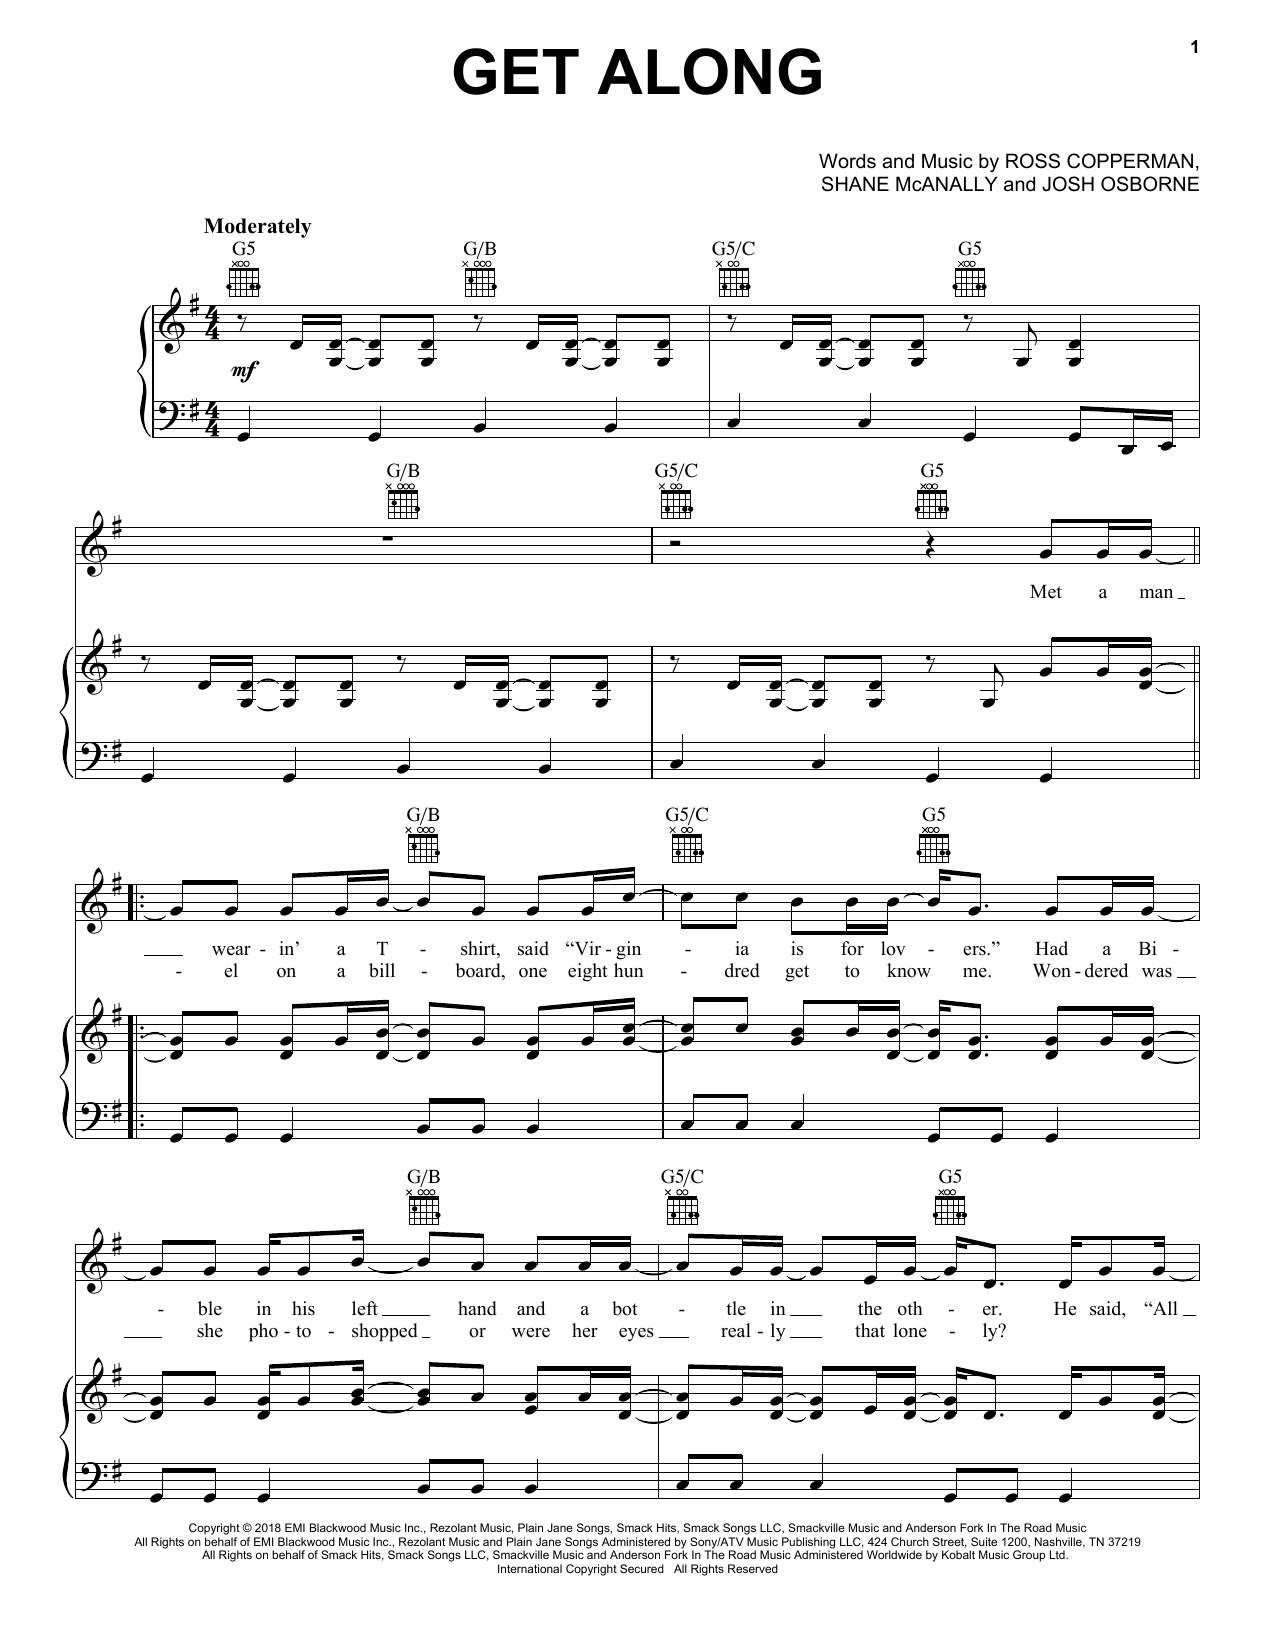 Download Kenny Chesney Get Along Sheet Music